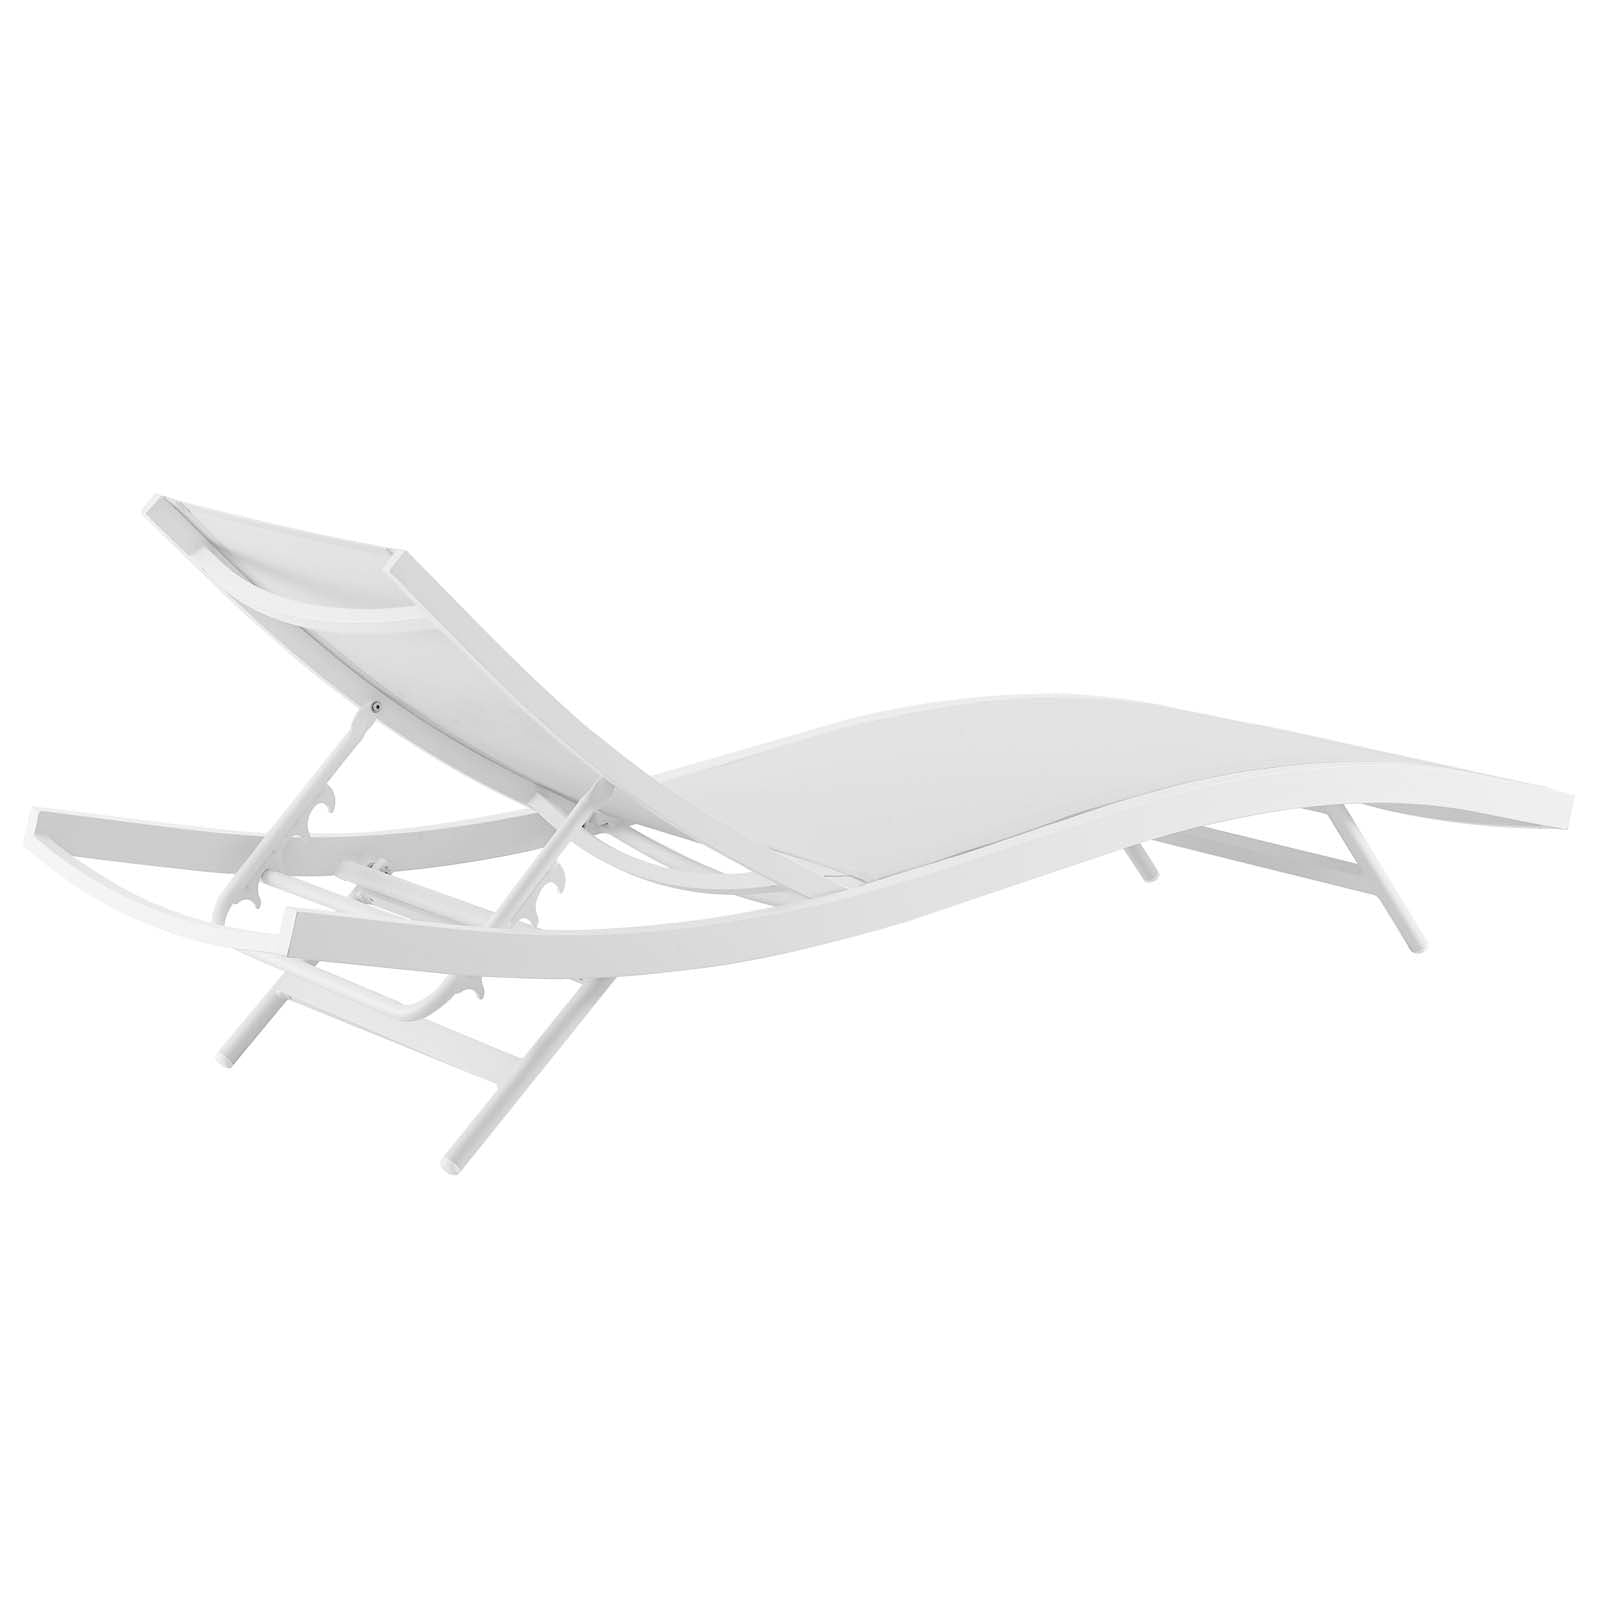 Glimpse Outdoor Patio Mesh Chaise Lounge Chair - East Shore Modern Home Furnishings